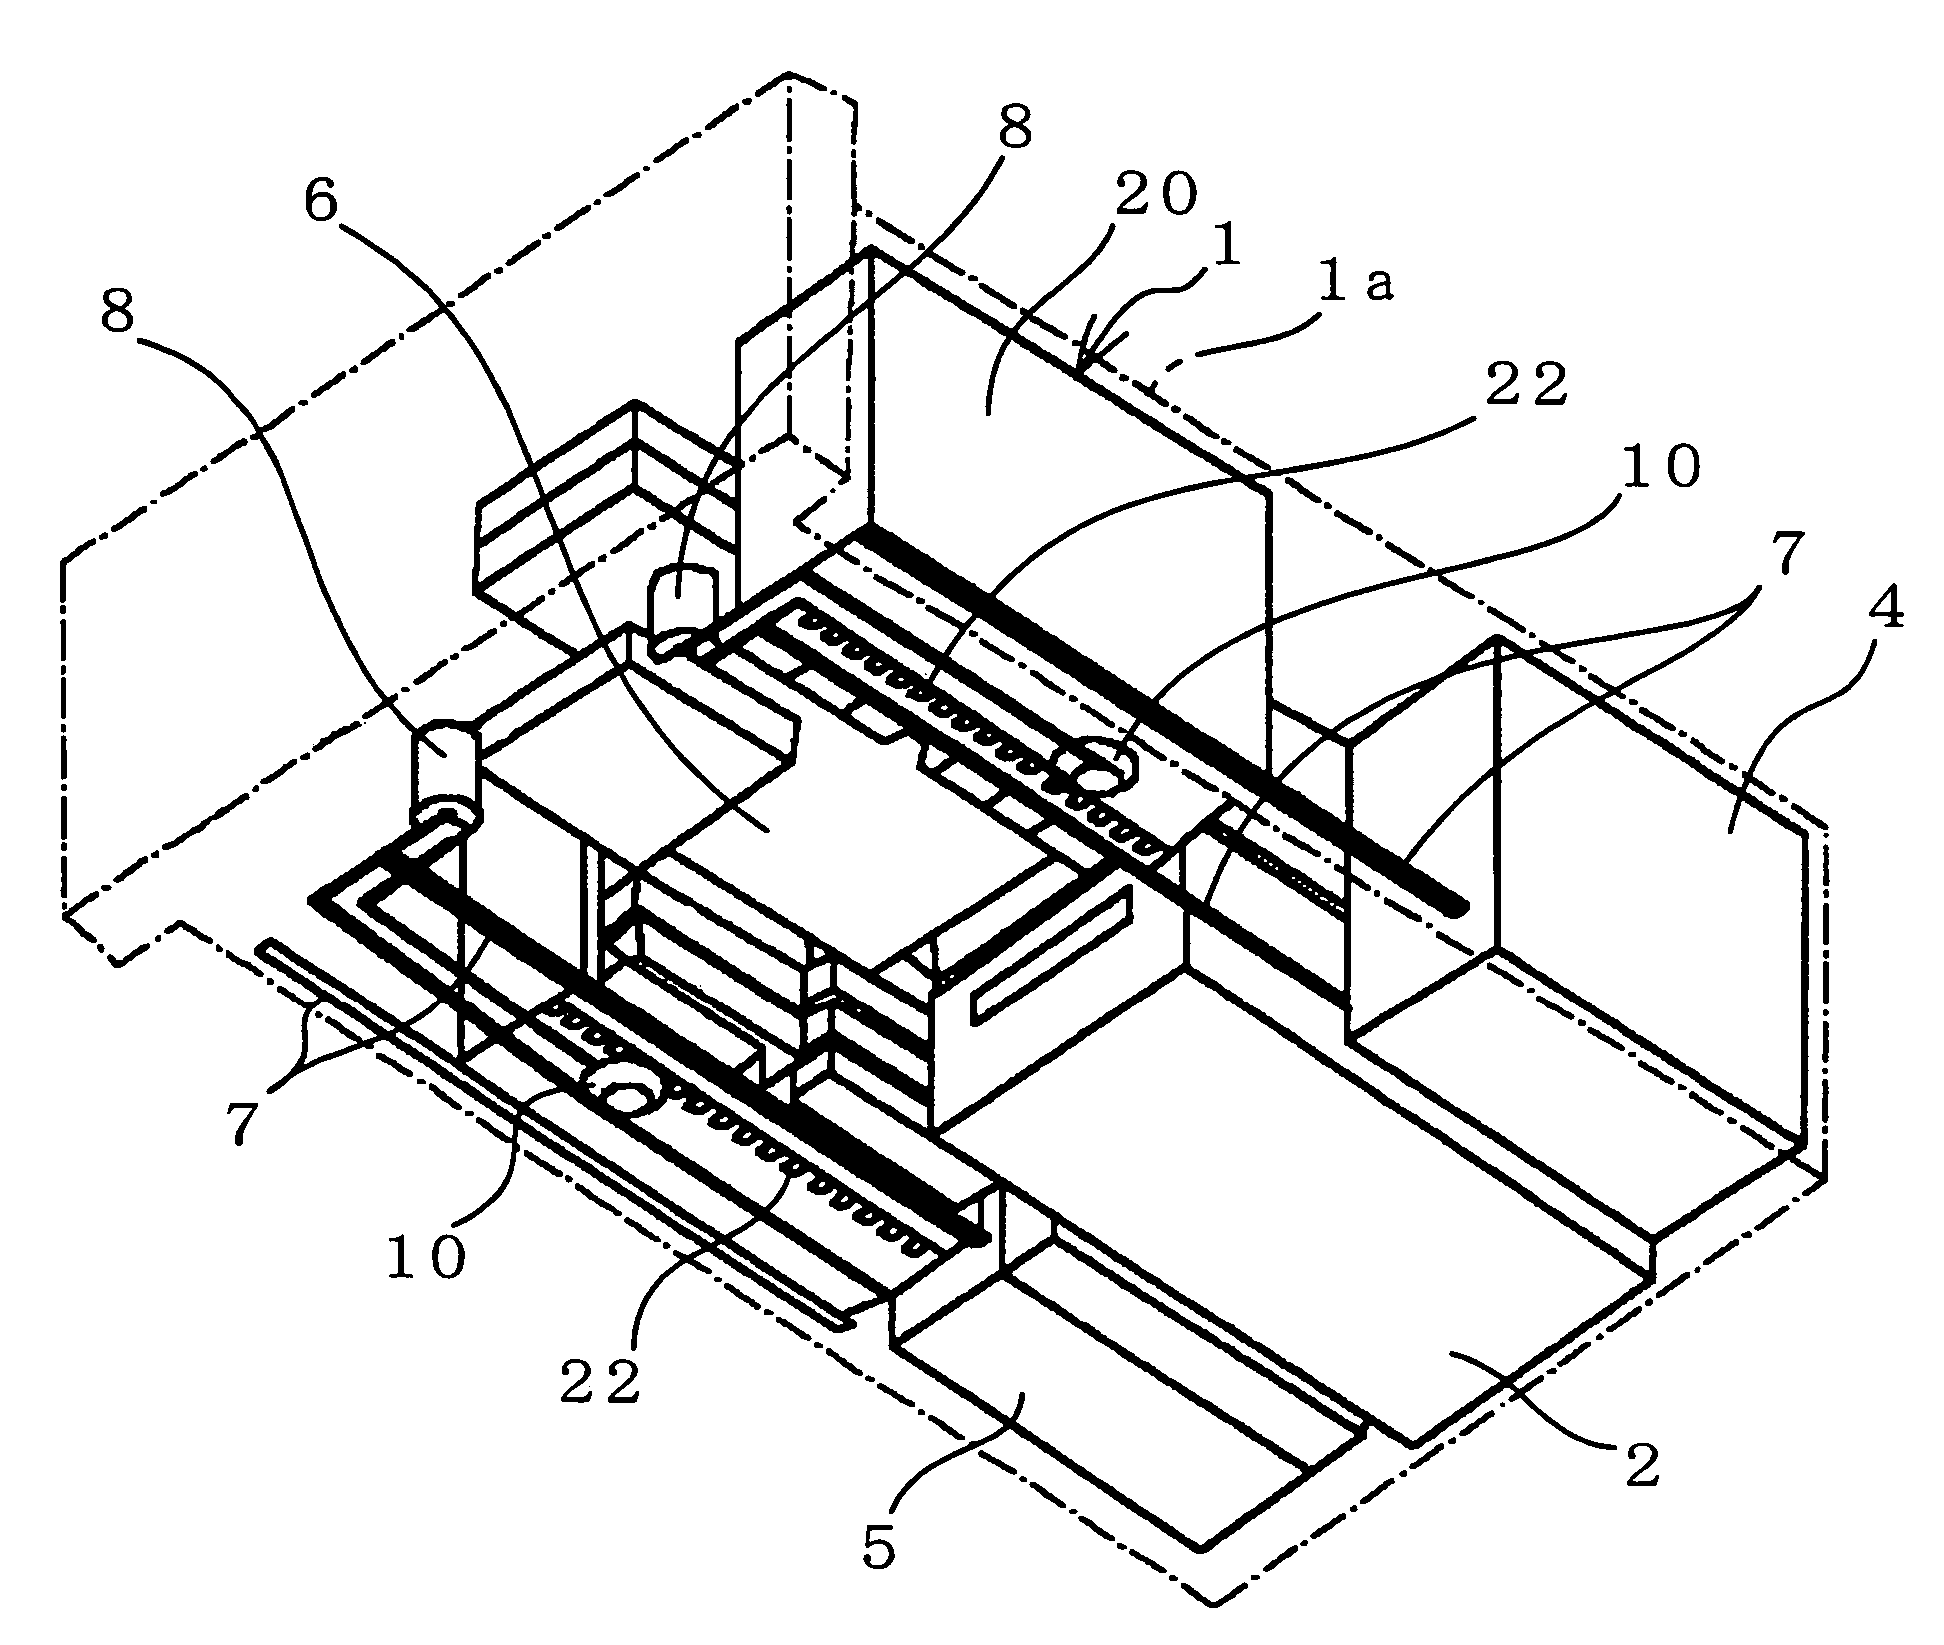 Magnetic tape cartridge library apparatus having vertically oriented stages